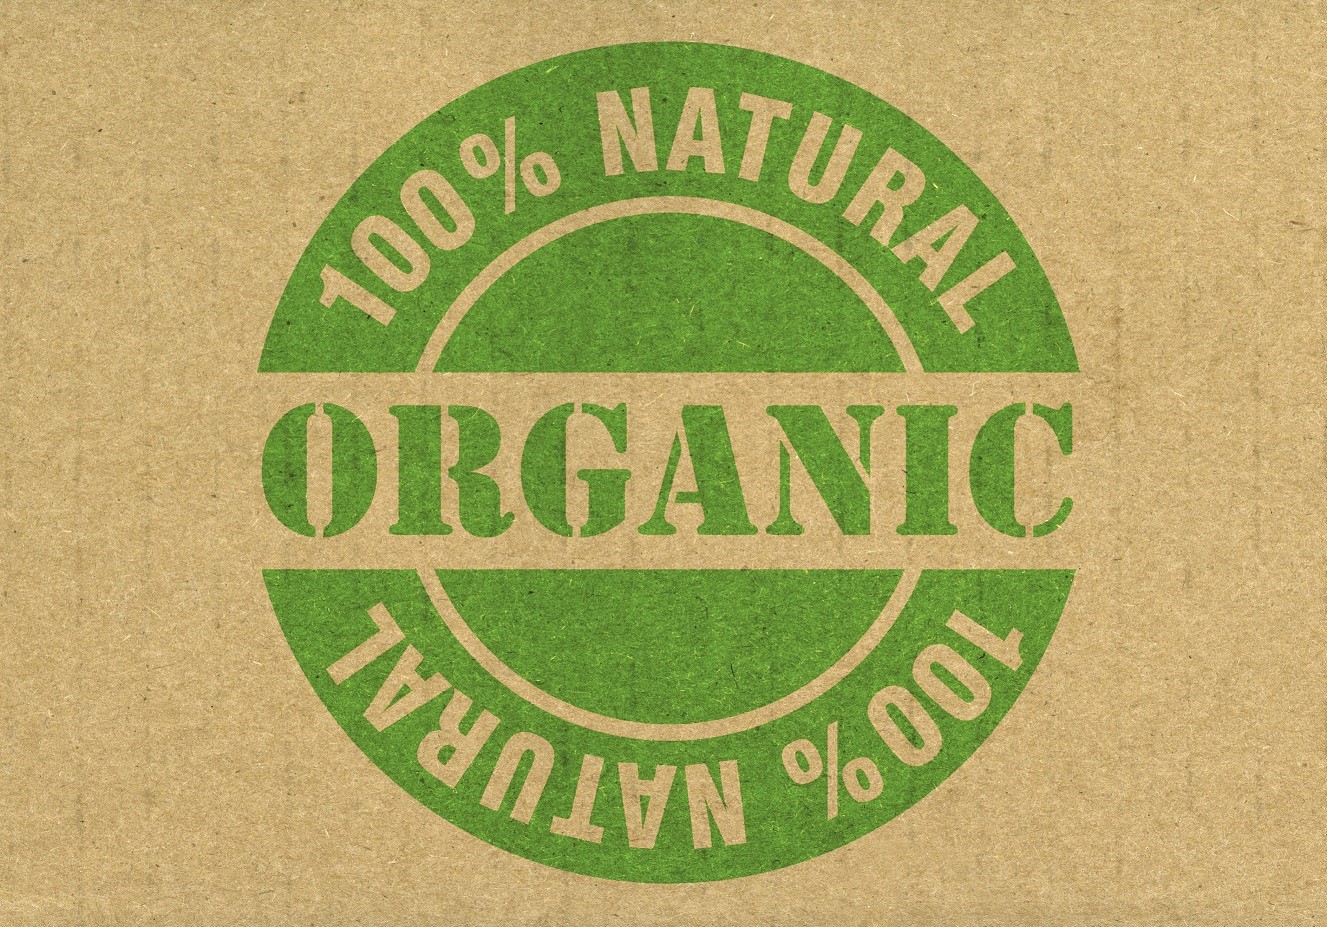 What does "Organic" really mean?